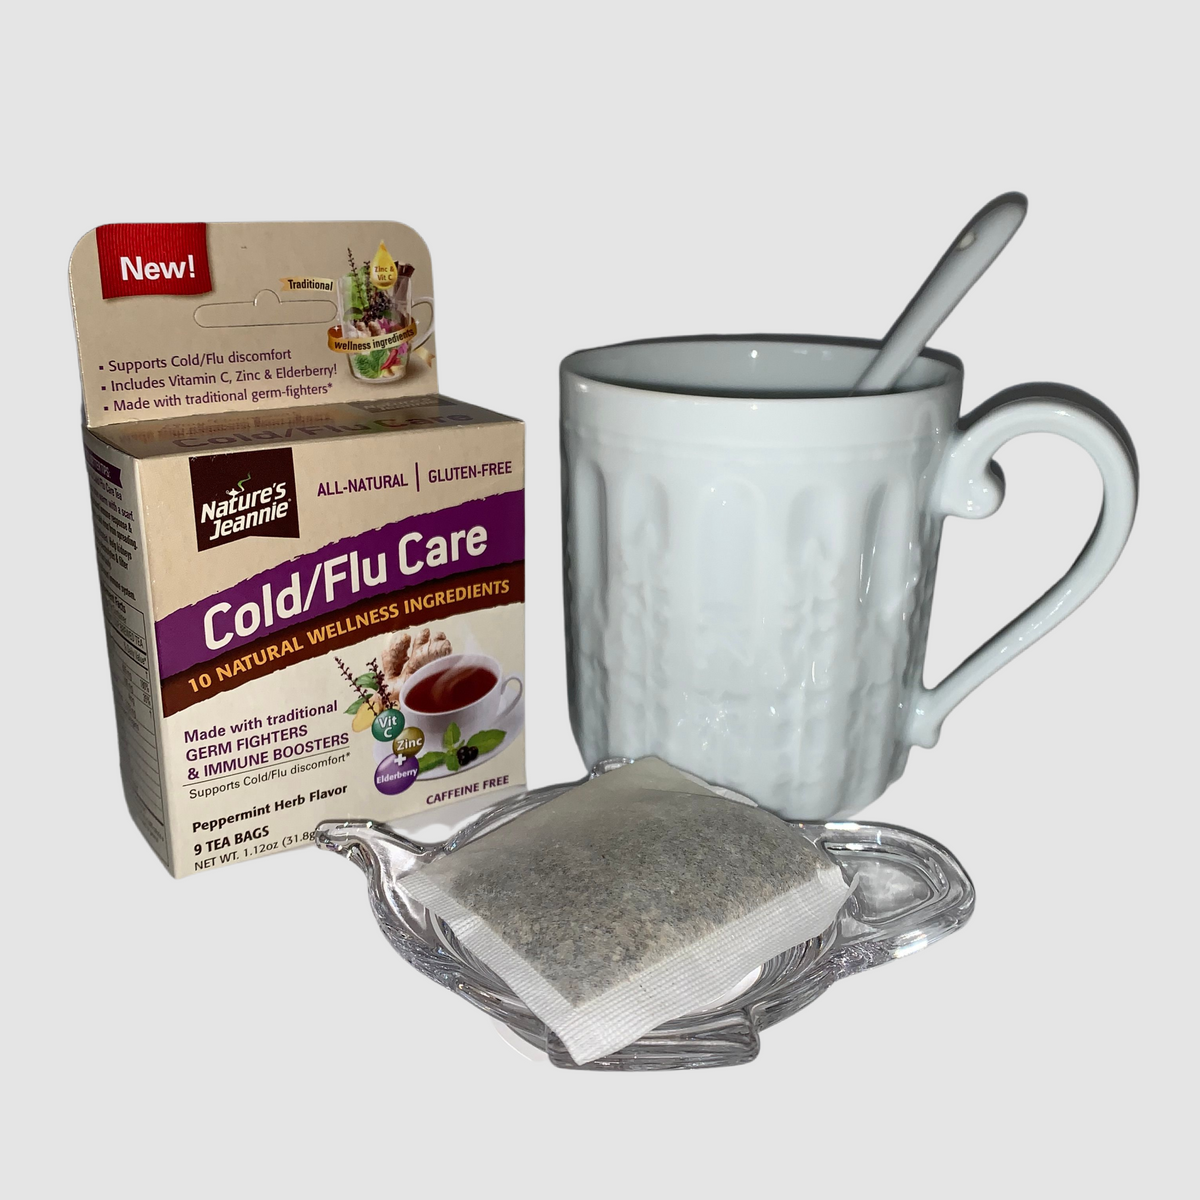 Nature&#39;s Jeannie Cold Care tea bag resting upon Nature&#39;s Jeannie tea caddy, cup and spoon.